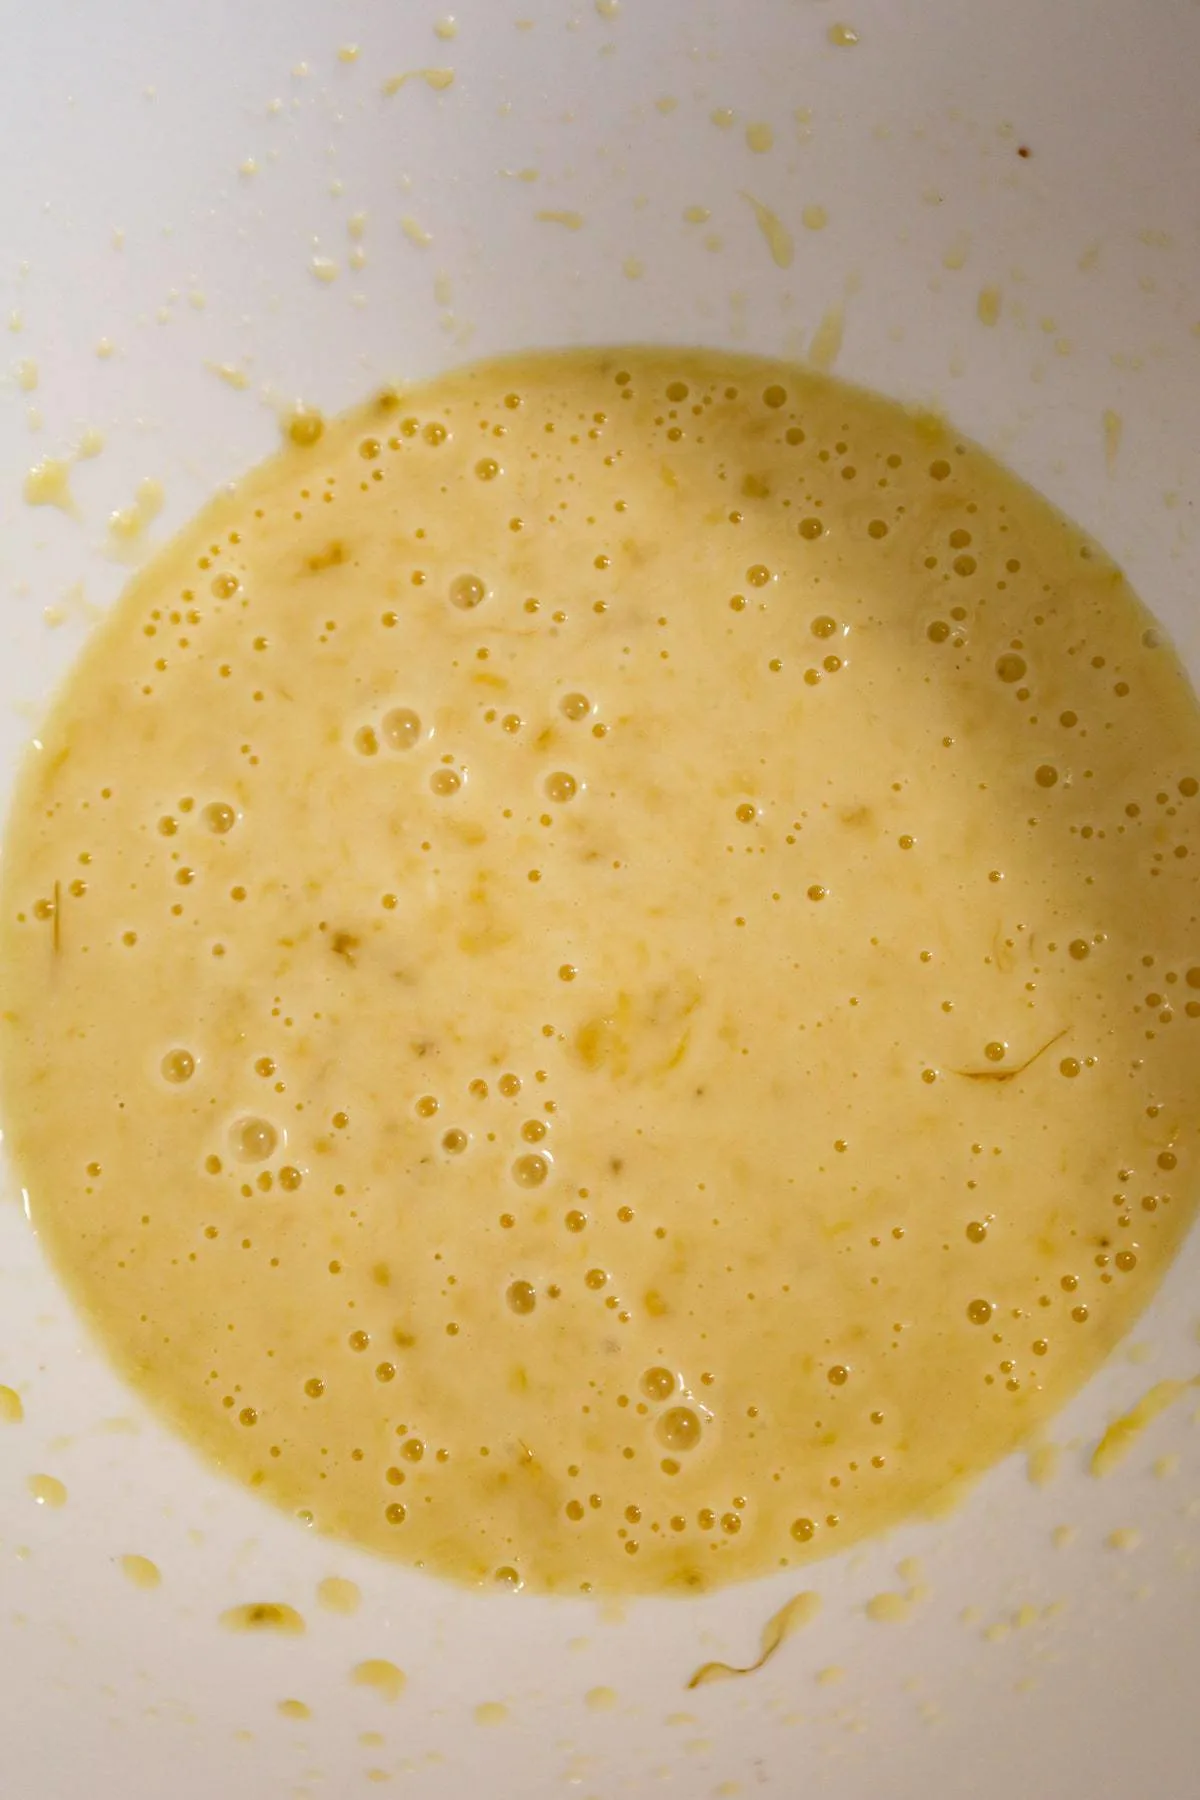 banana, milk, egg and oil mixture in a mixing bowl